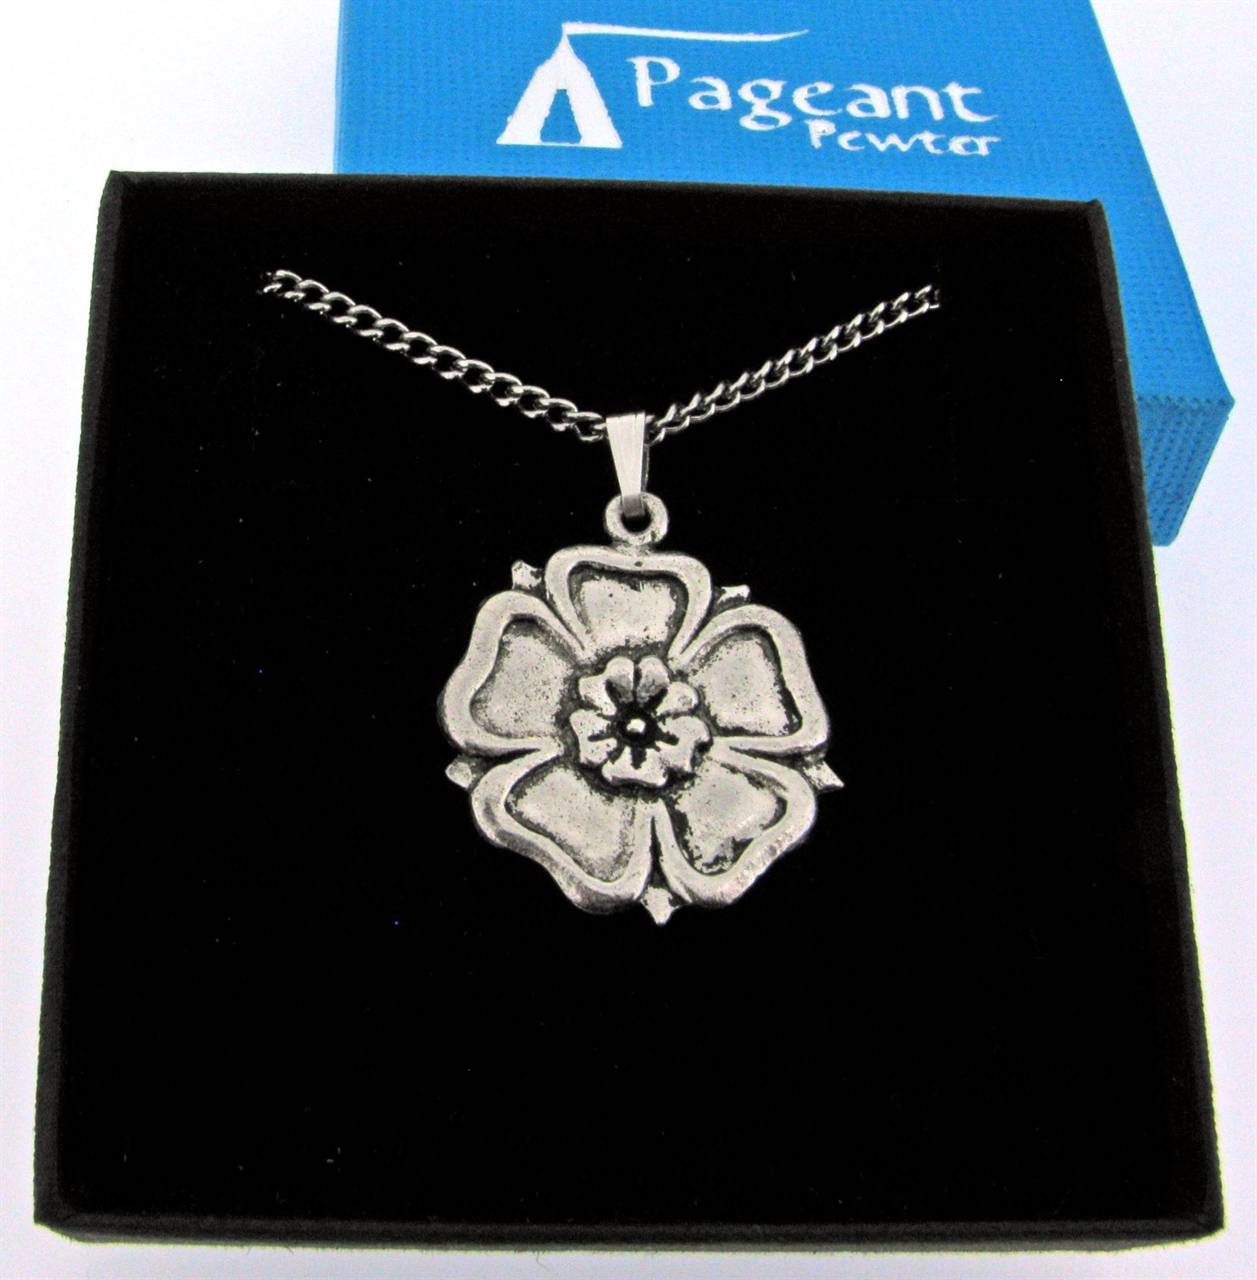 English Rose - high quality pewter gifts from Pageant Pewter